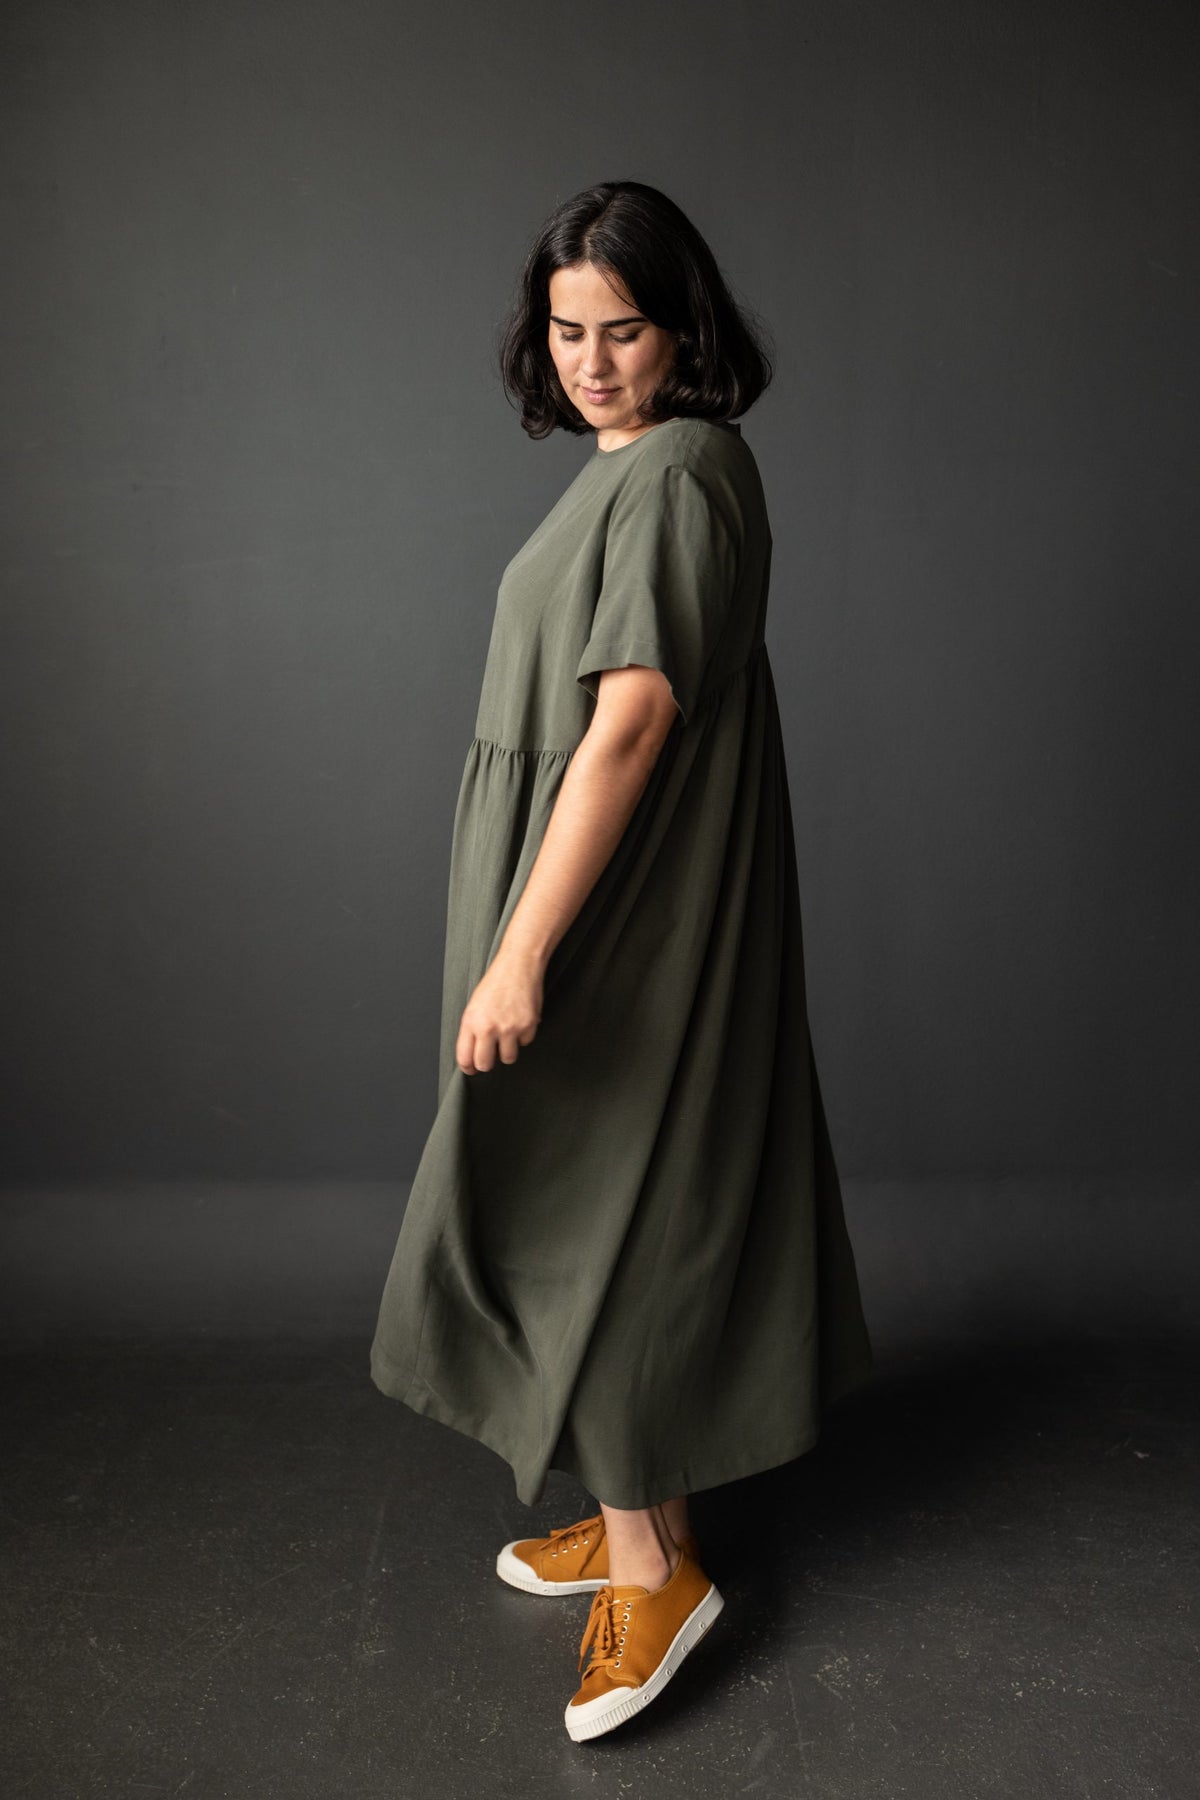 FLORENCE Top & Dress Sewing Pattern by Merchant & Mills